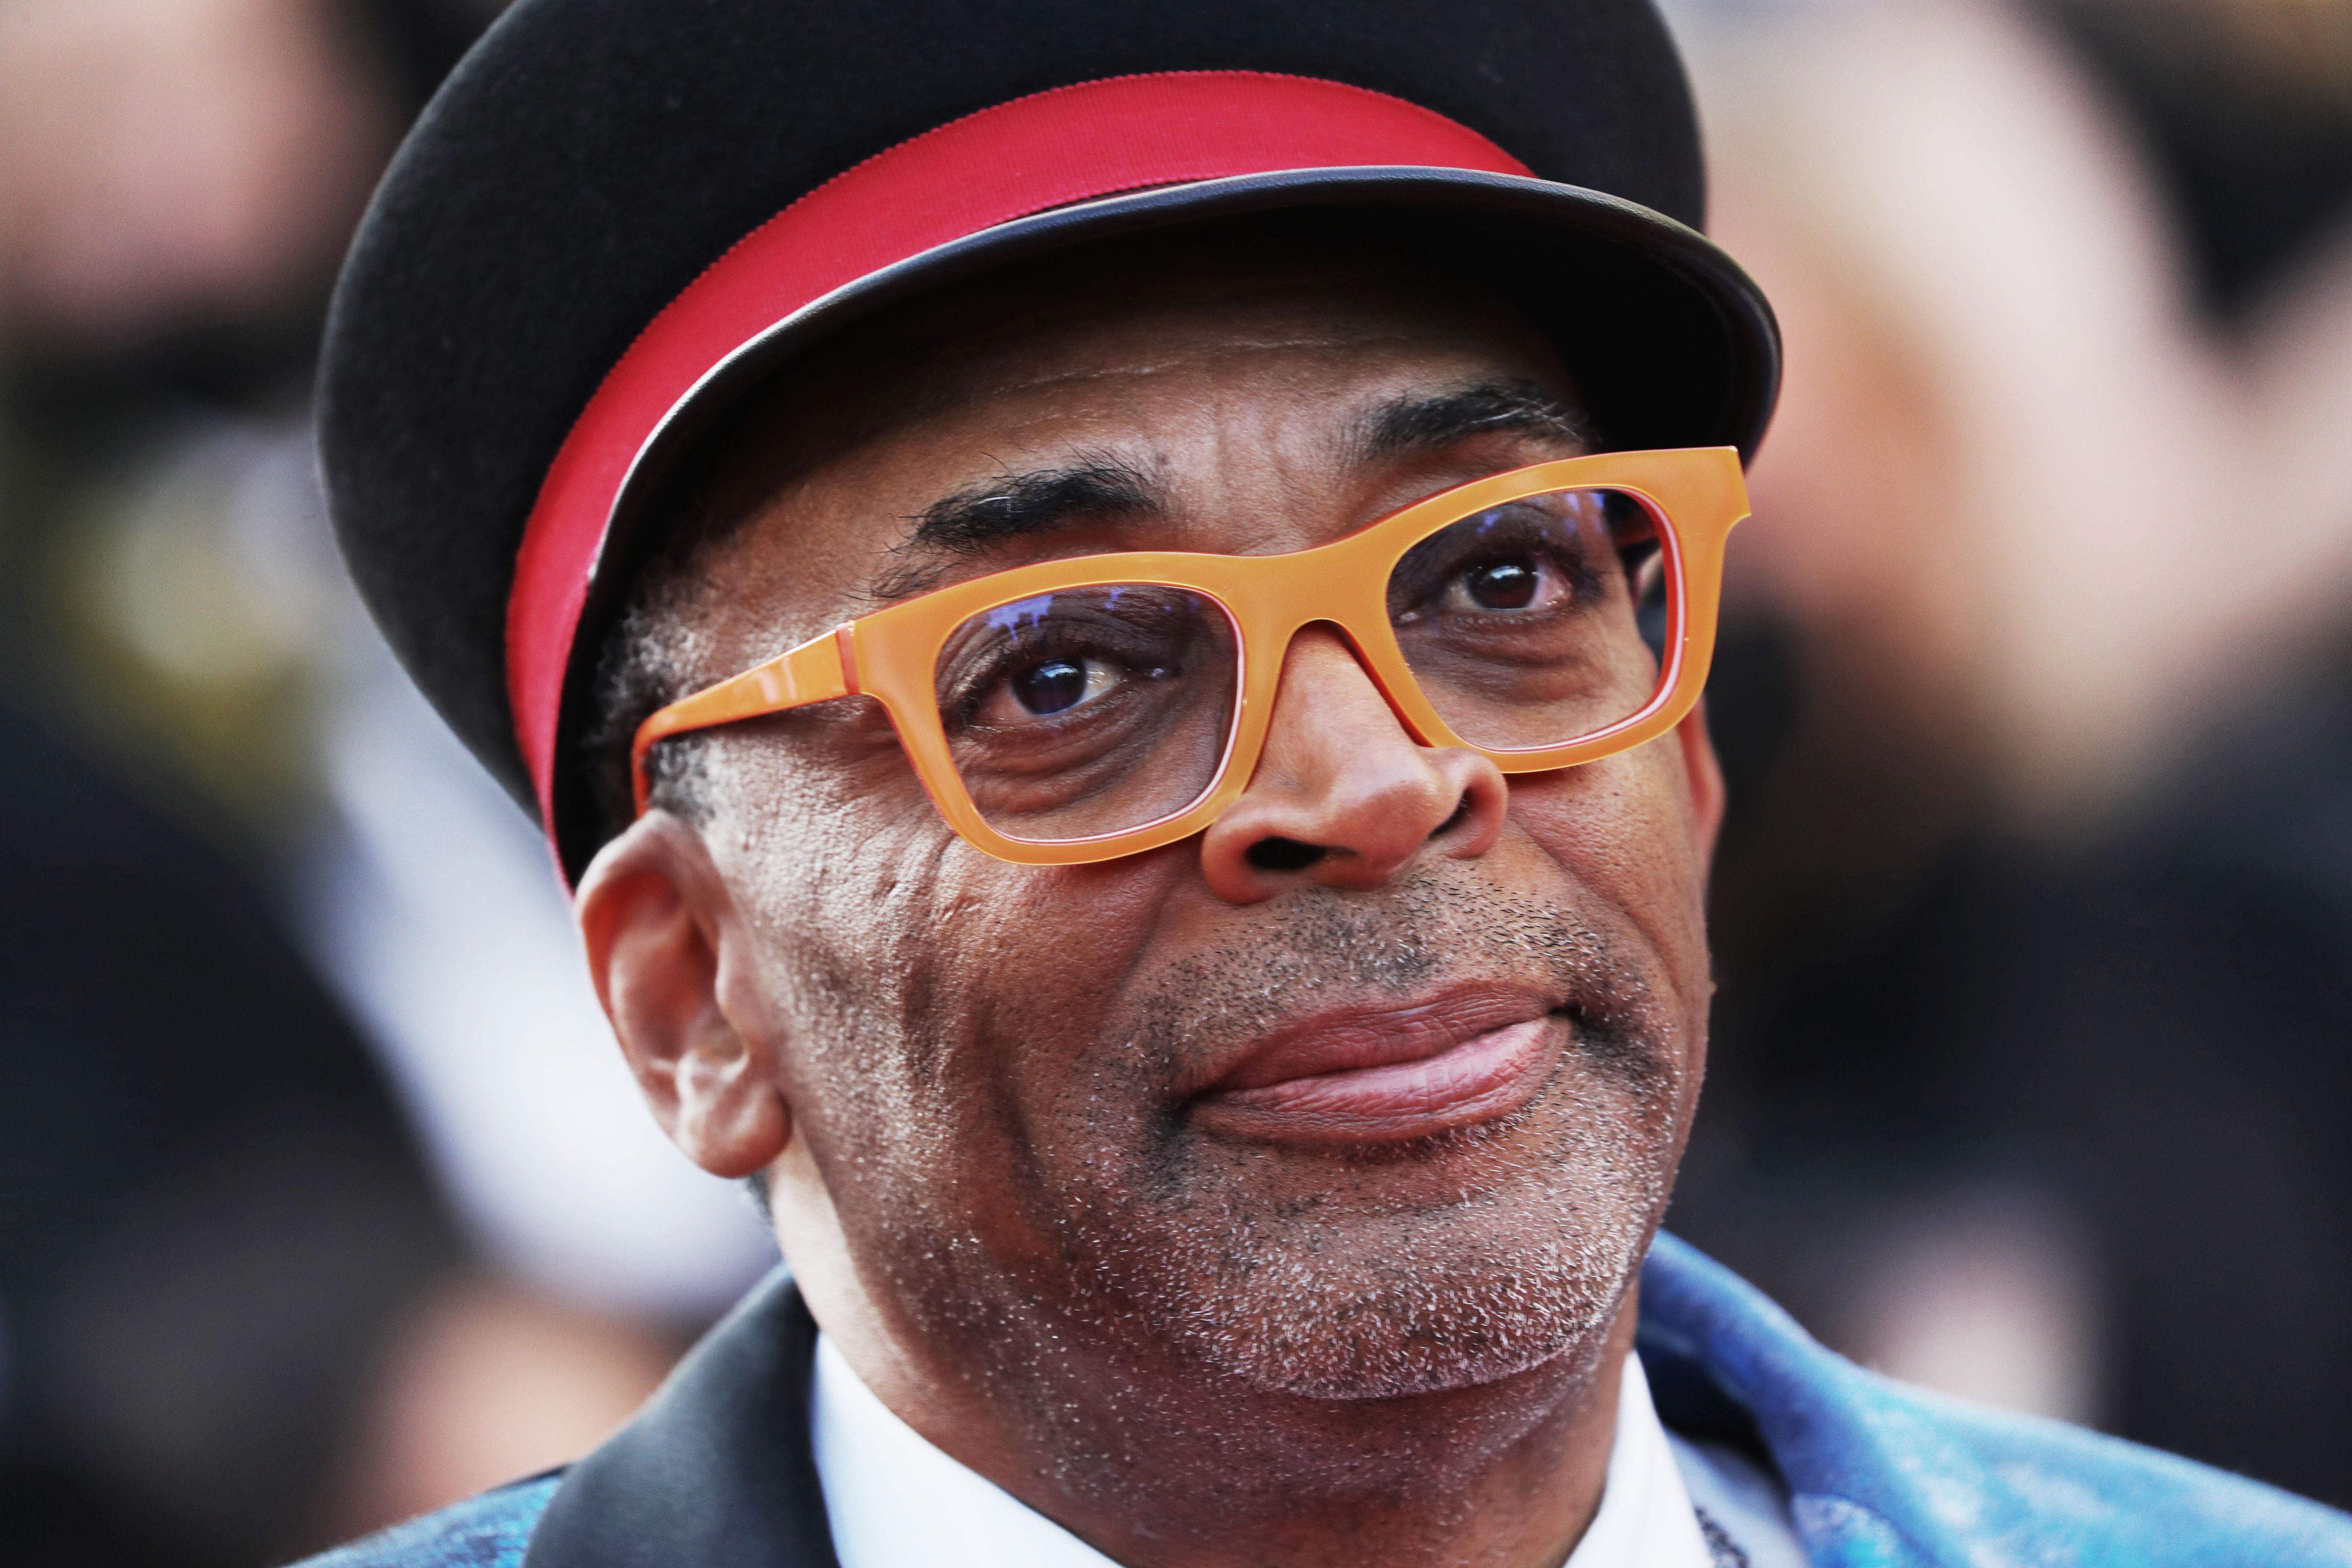 Director Spike Lee attends the final screening of "OSS 117: From Africa With Love" and closing ceremony during the 74th annual Cannes Film Festival on July 17, 2021 in Cannes, France. Lee recently admitted to being a 9/11 conspiracy theorist.